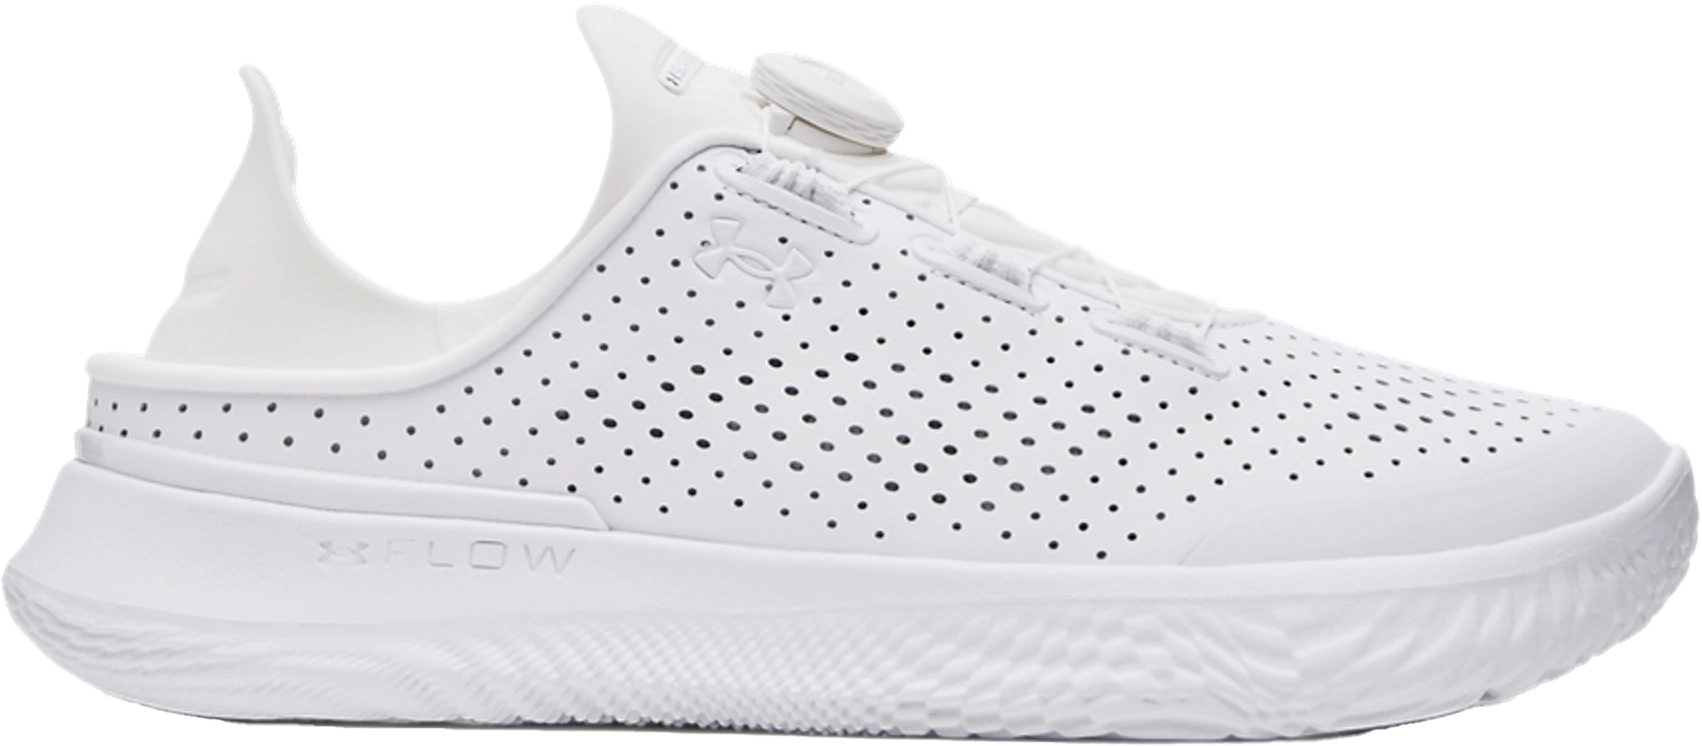 Buty fitness Under Armour UA Slipspeed Trainer SYN-WHT